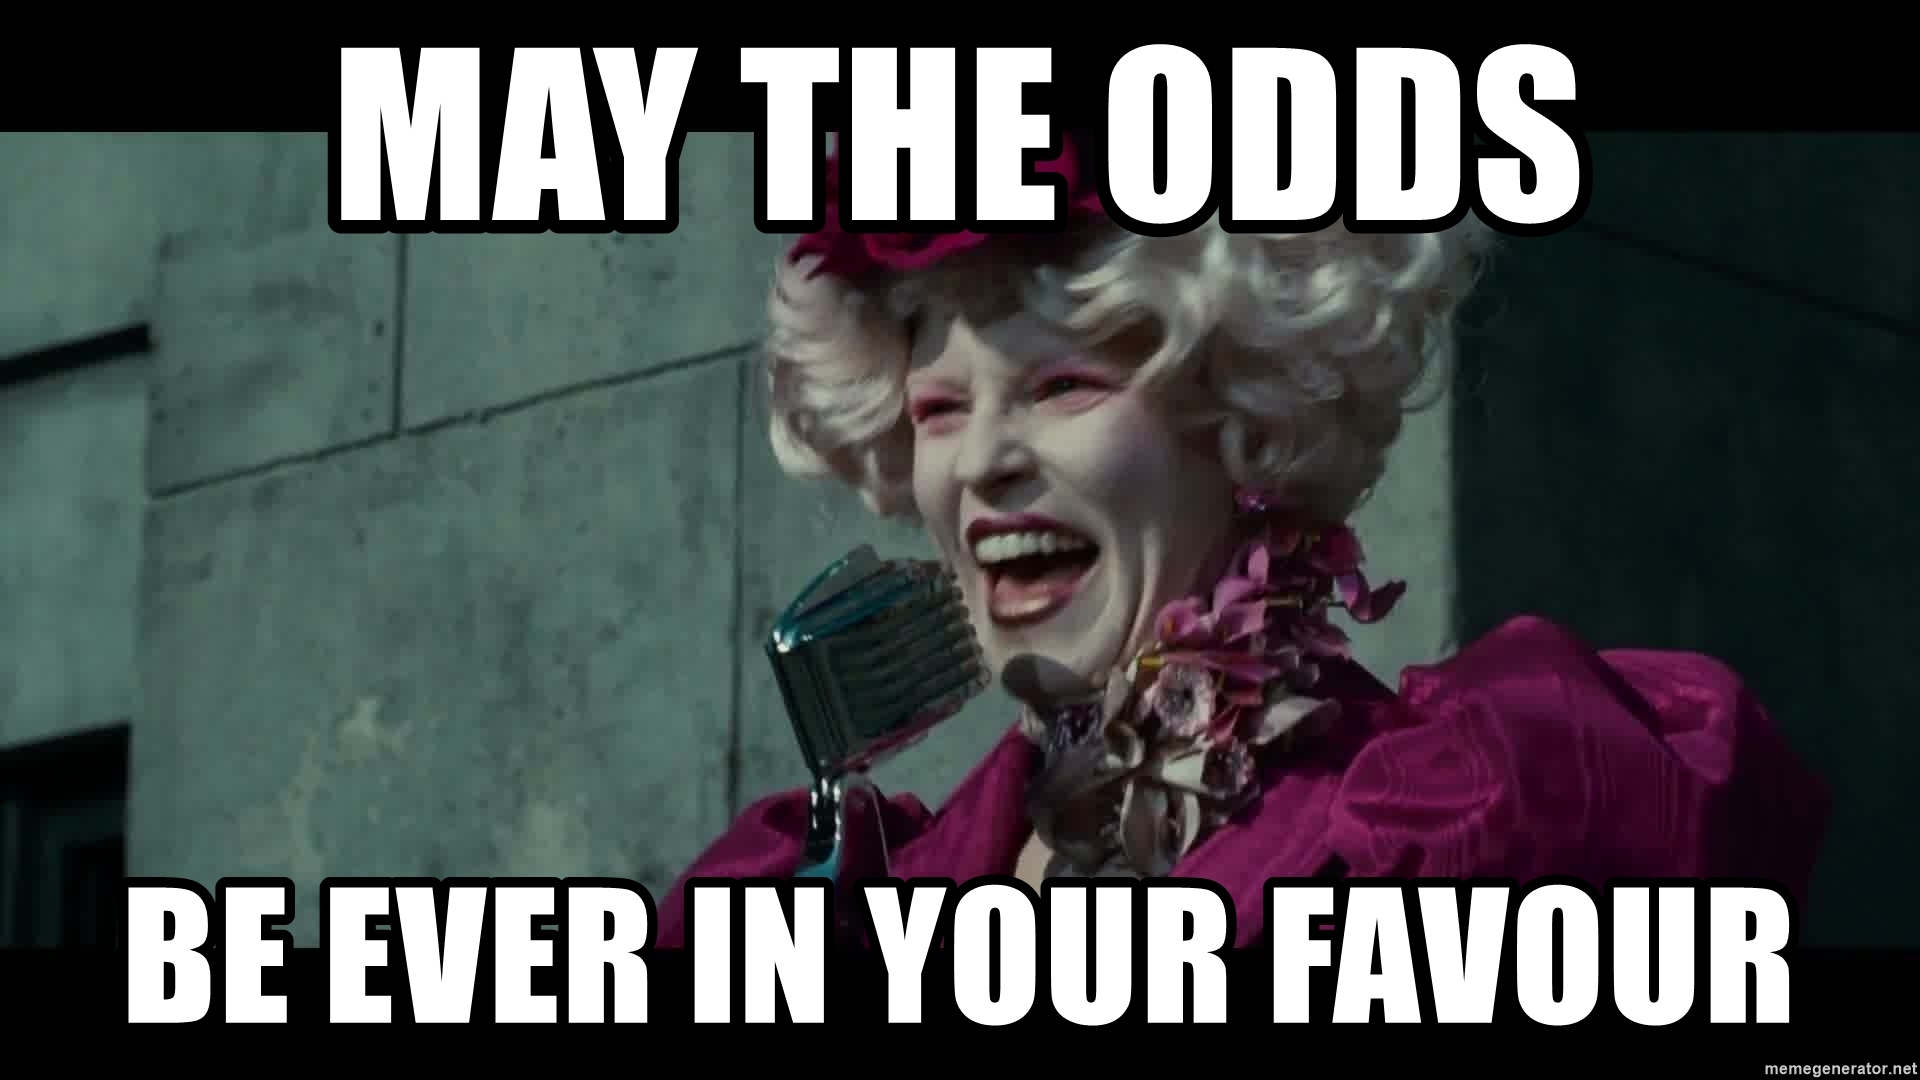 May the odds be ever in your favour